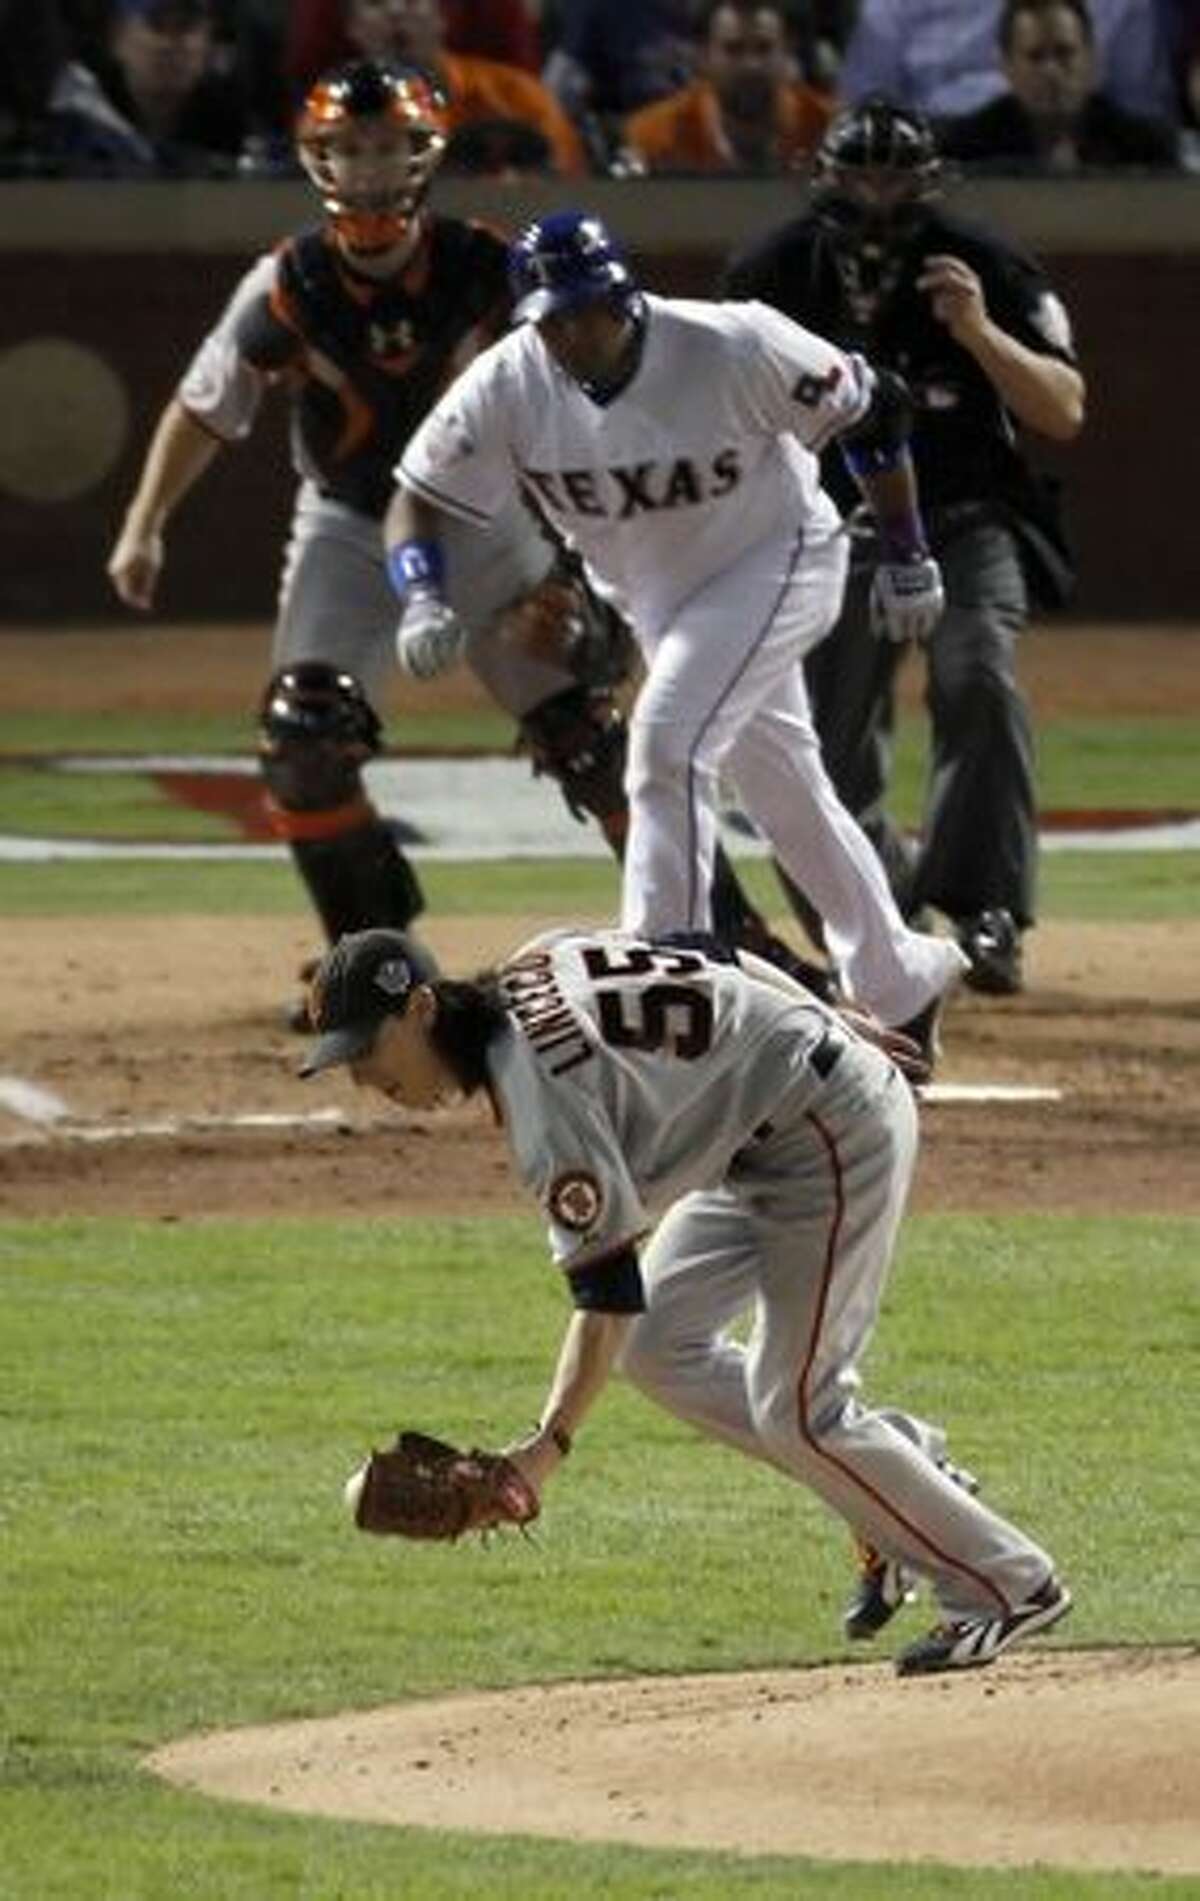 San Francisco Giants starting pitcher Tim Lincecum (55) fields a Bengie Molina hit to end the fifth inning during game 5 of the 2010 World Series between the San Francisco Giants and the Texas Rangers on Monday in Arlington, Tx.